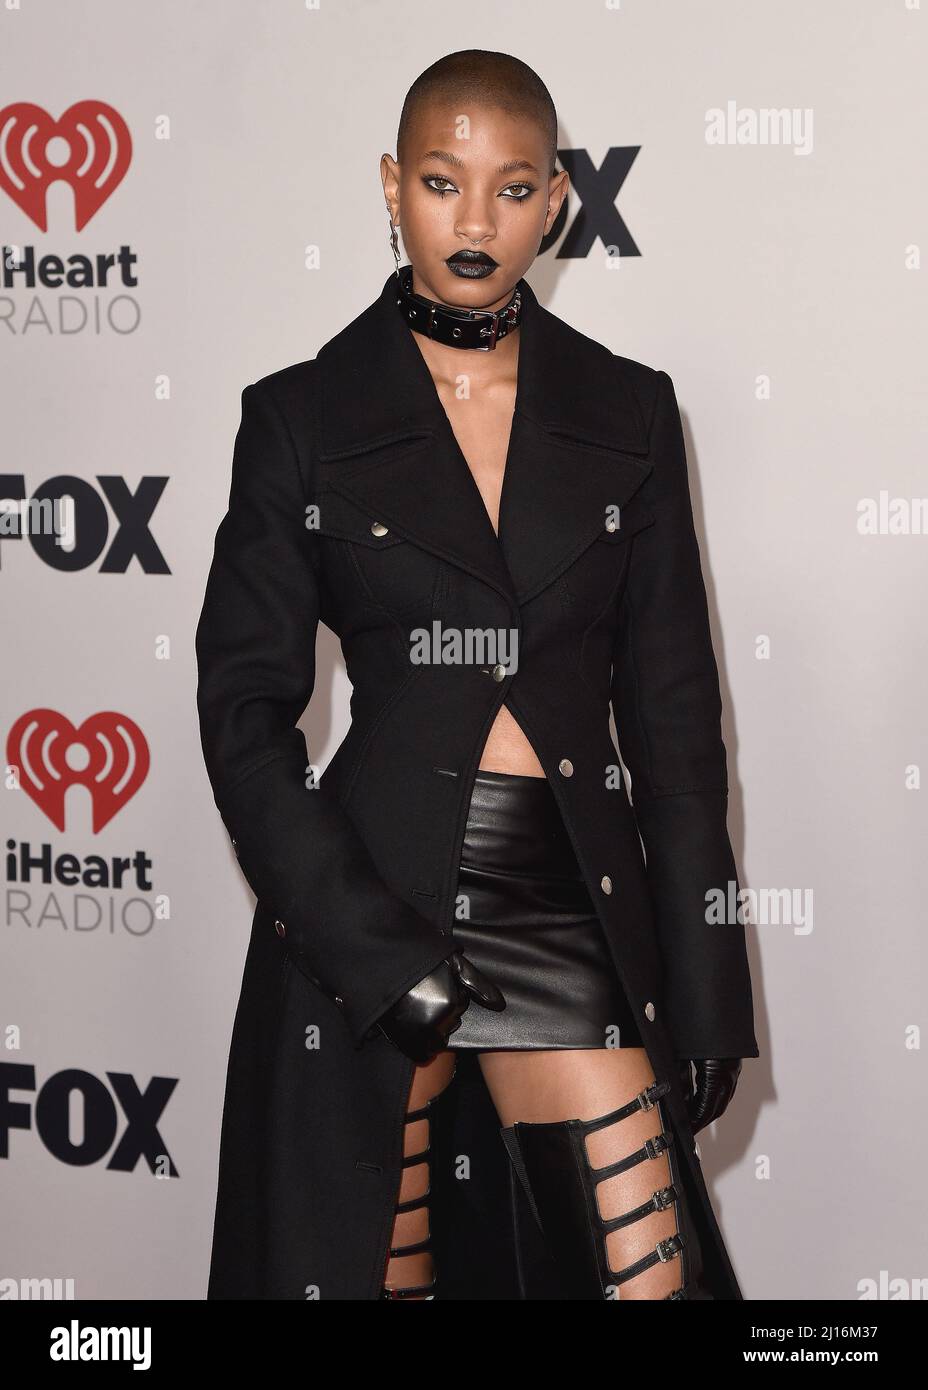 2022 IHEARTRADIO MUSIC AWARDS: Willow Smith at the 2021 “iHeartRadio Music Awards” airing live from The Shrine Auditorium in Los Angeles, Tuesday, March 22 (8:00-10:00 PM ET Live/PT tape-delayed) on FOX. CR: Scott Kirkland/PictureGroup/Sipa USA for FOX. © 2022 FOX MEDIA, LLC. Credit: Sipa USA/Alamy Live News Stock Photo